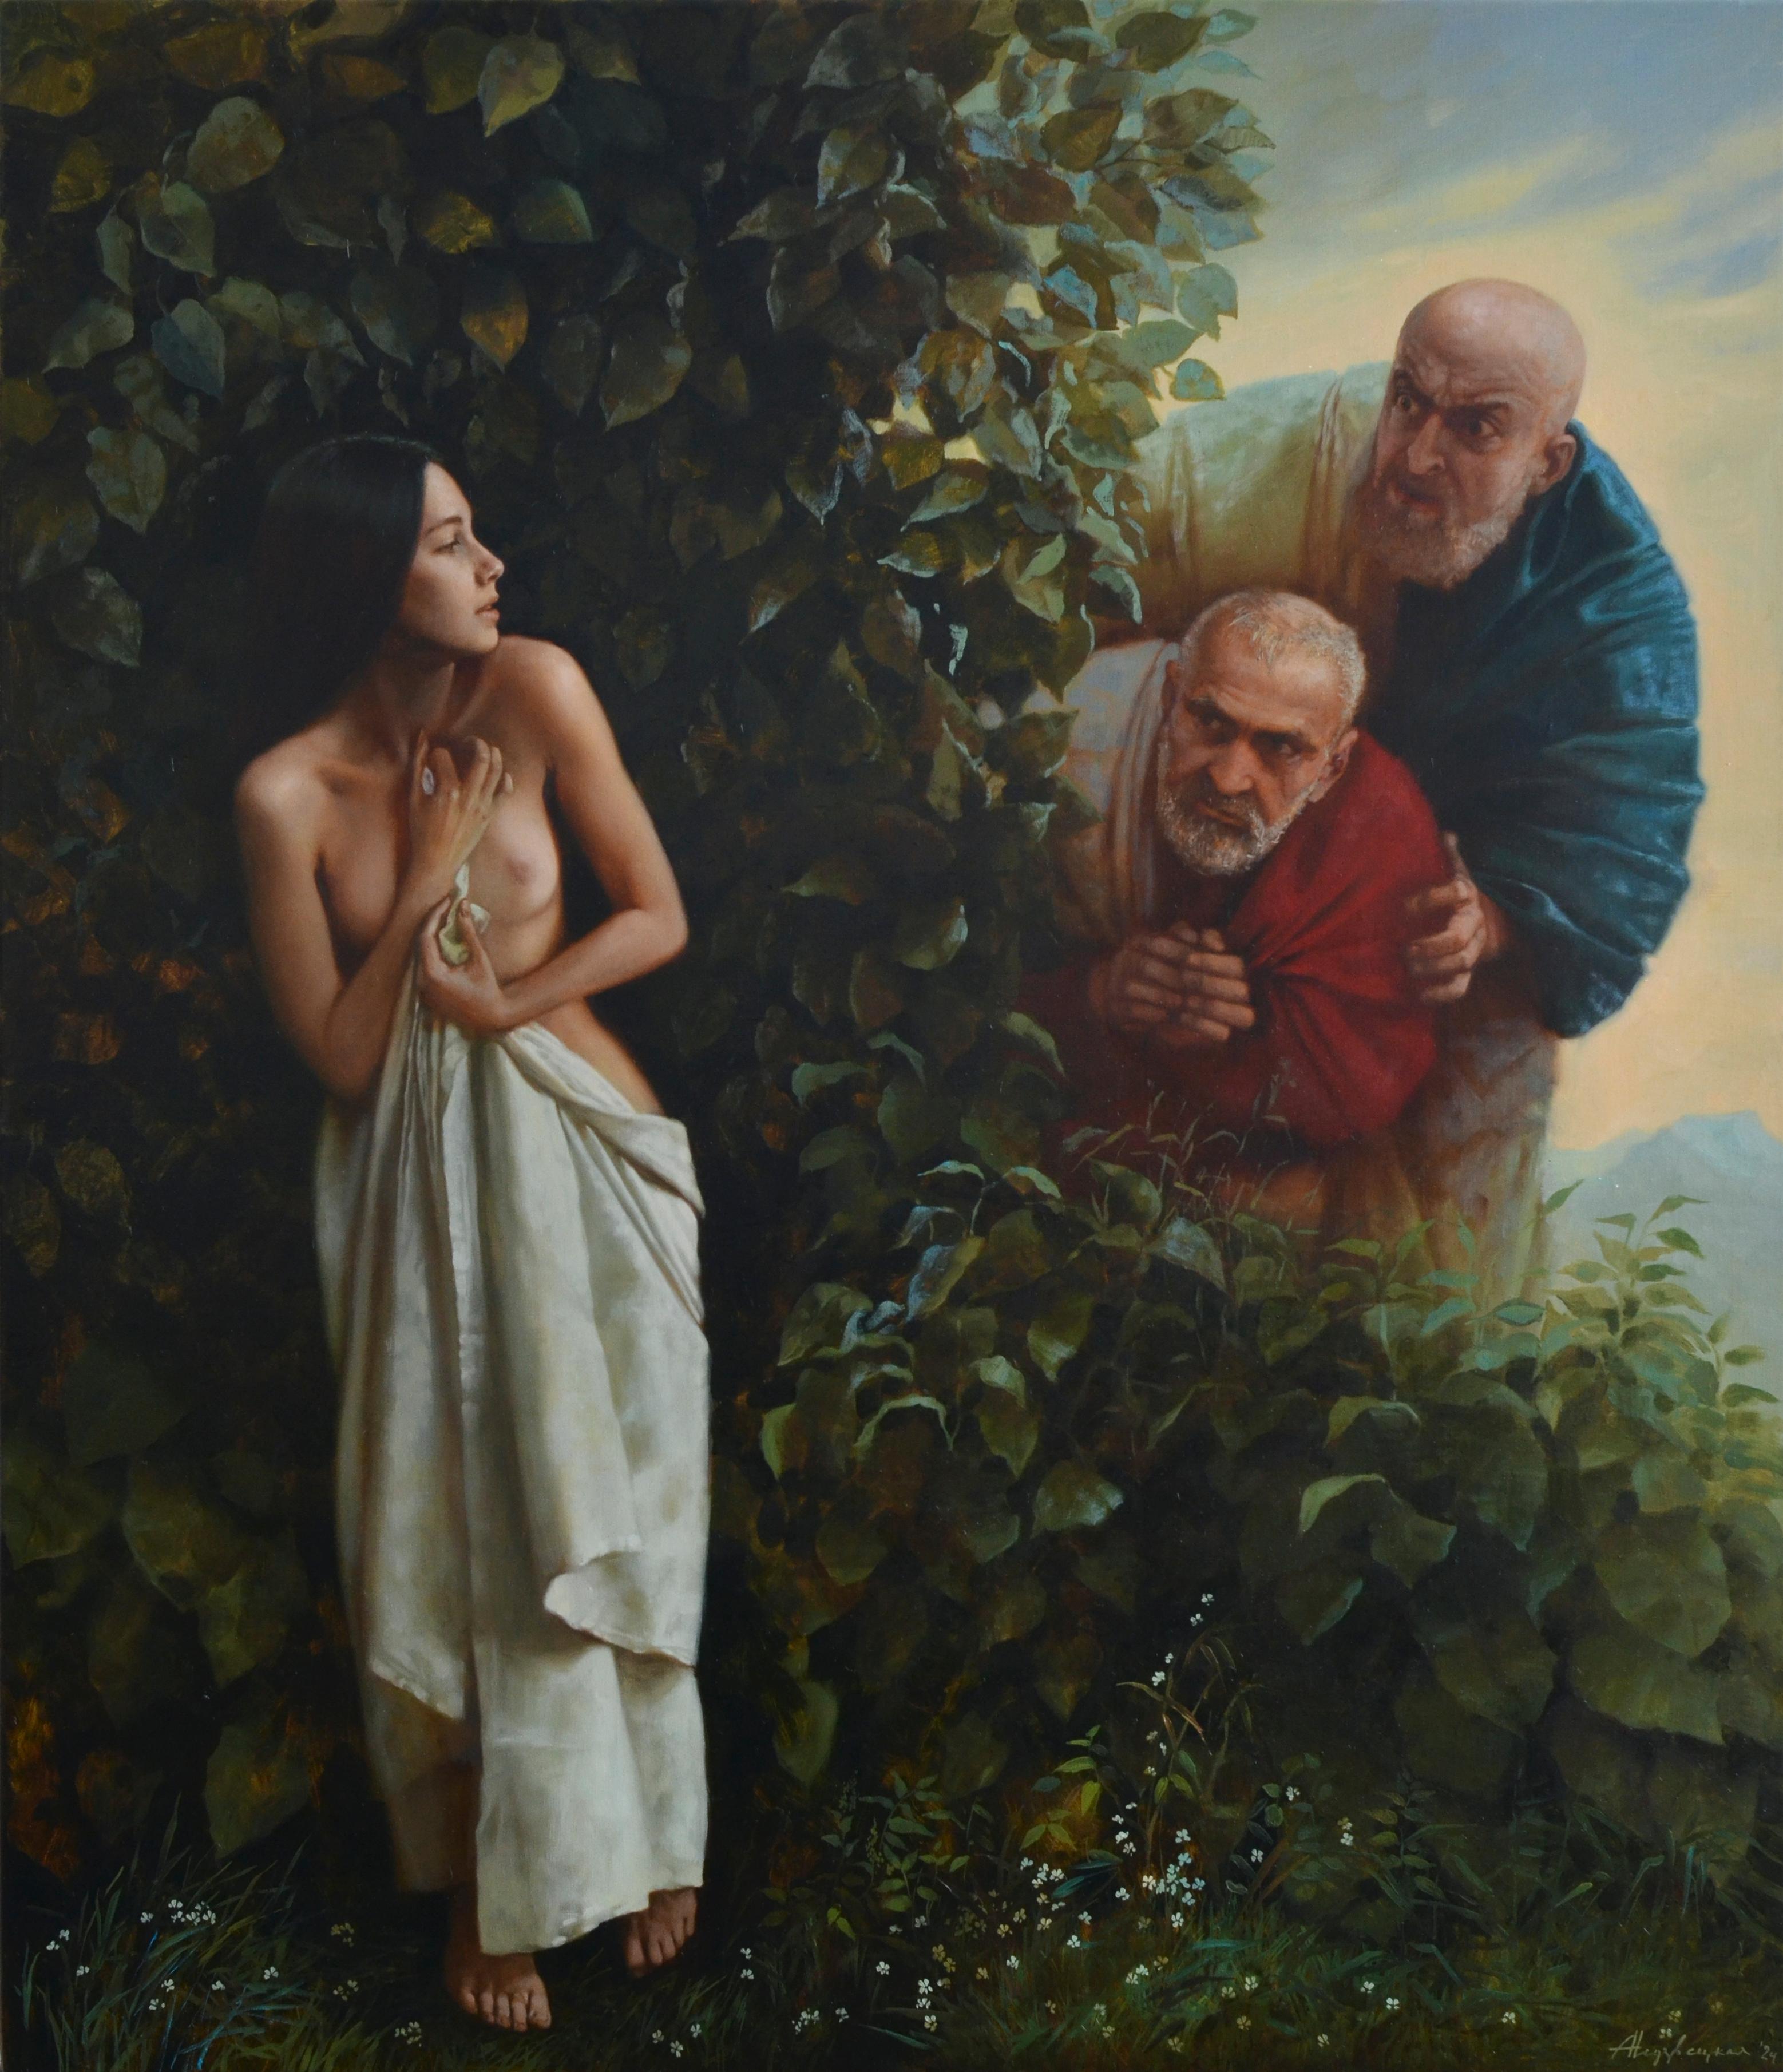 Susanna and the elders